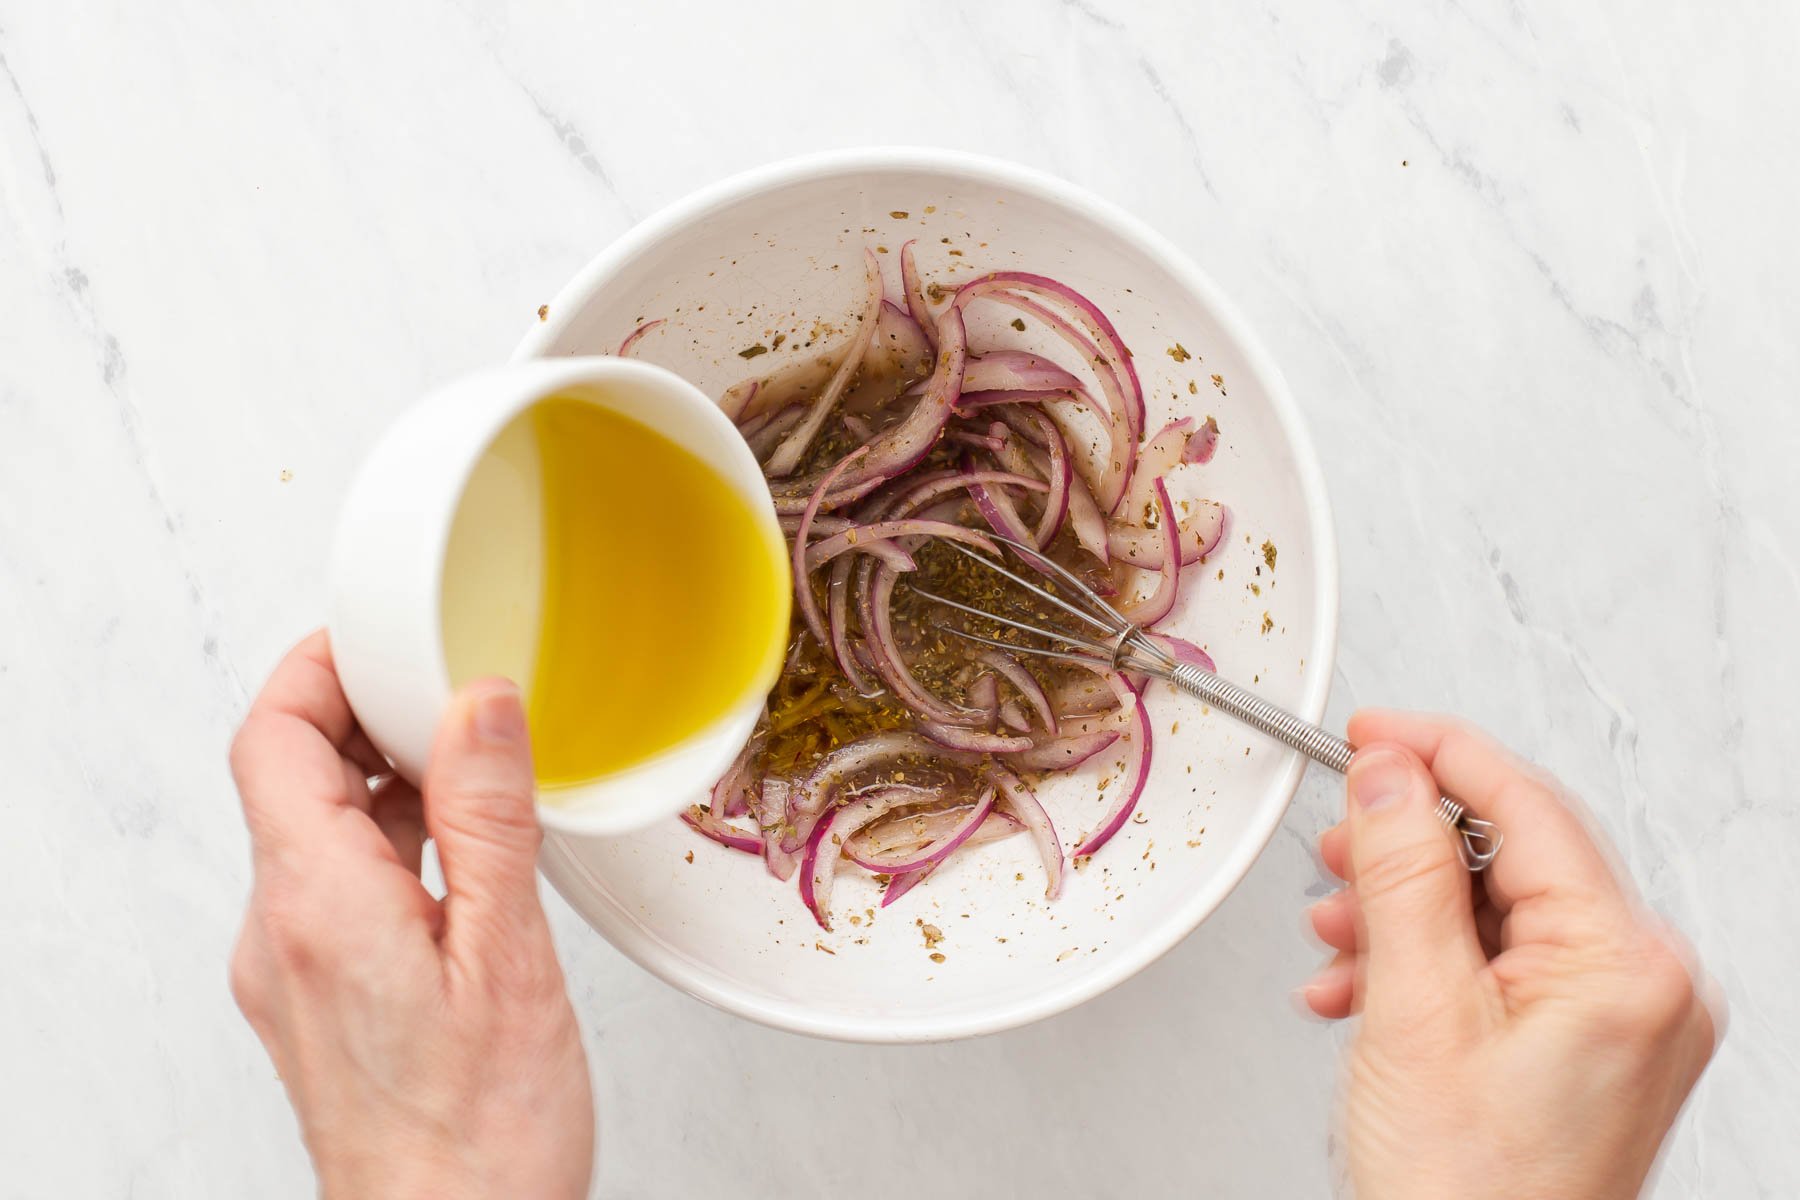 Hand pouring olive oil in bowl with red onions and herbs.